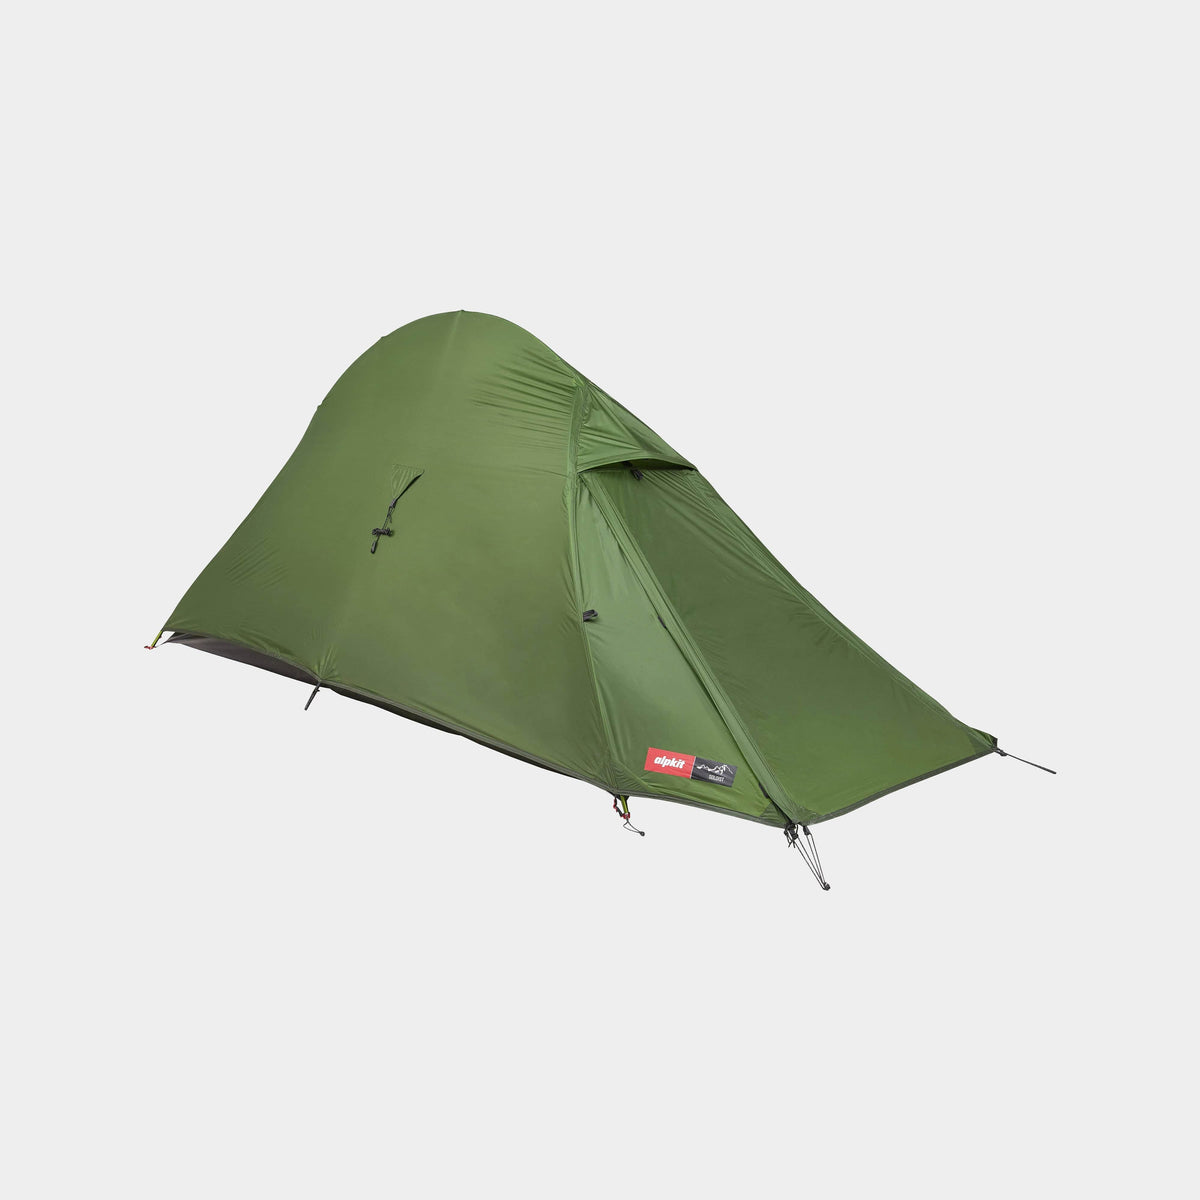 Soloist one person lightweight tent